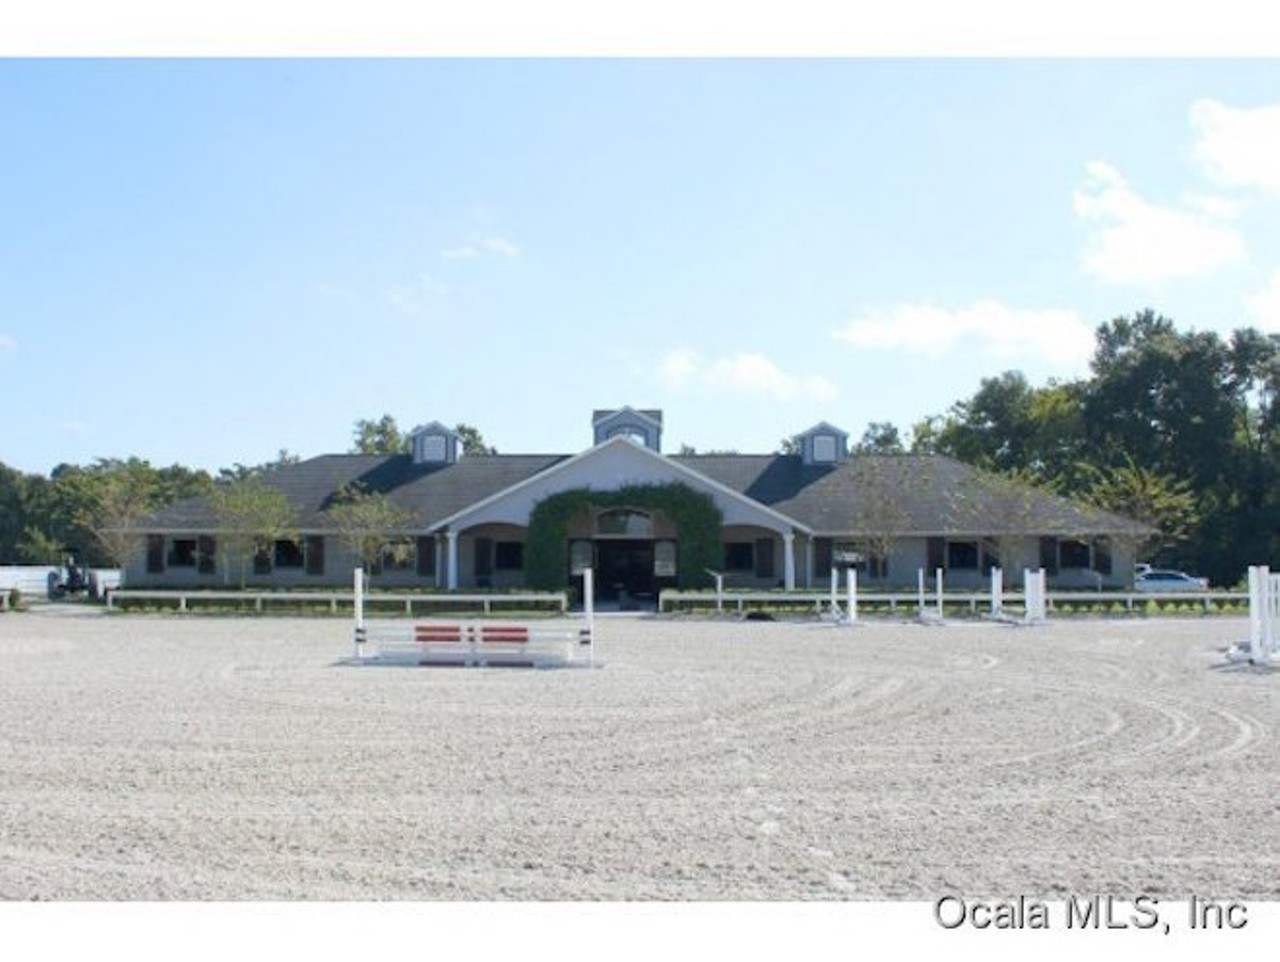 1815 Gregory Road Orlando: For the horsey set, this house is a 20-acre horse farm for $2,900,000.